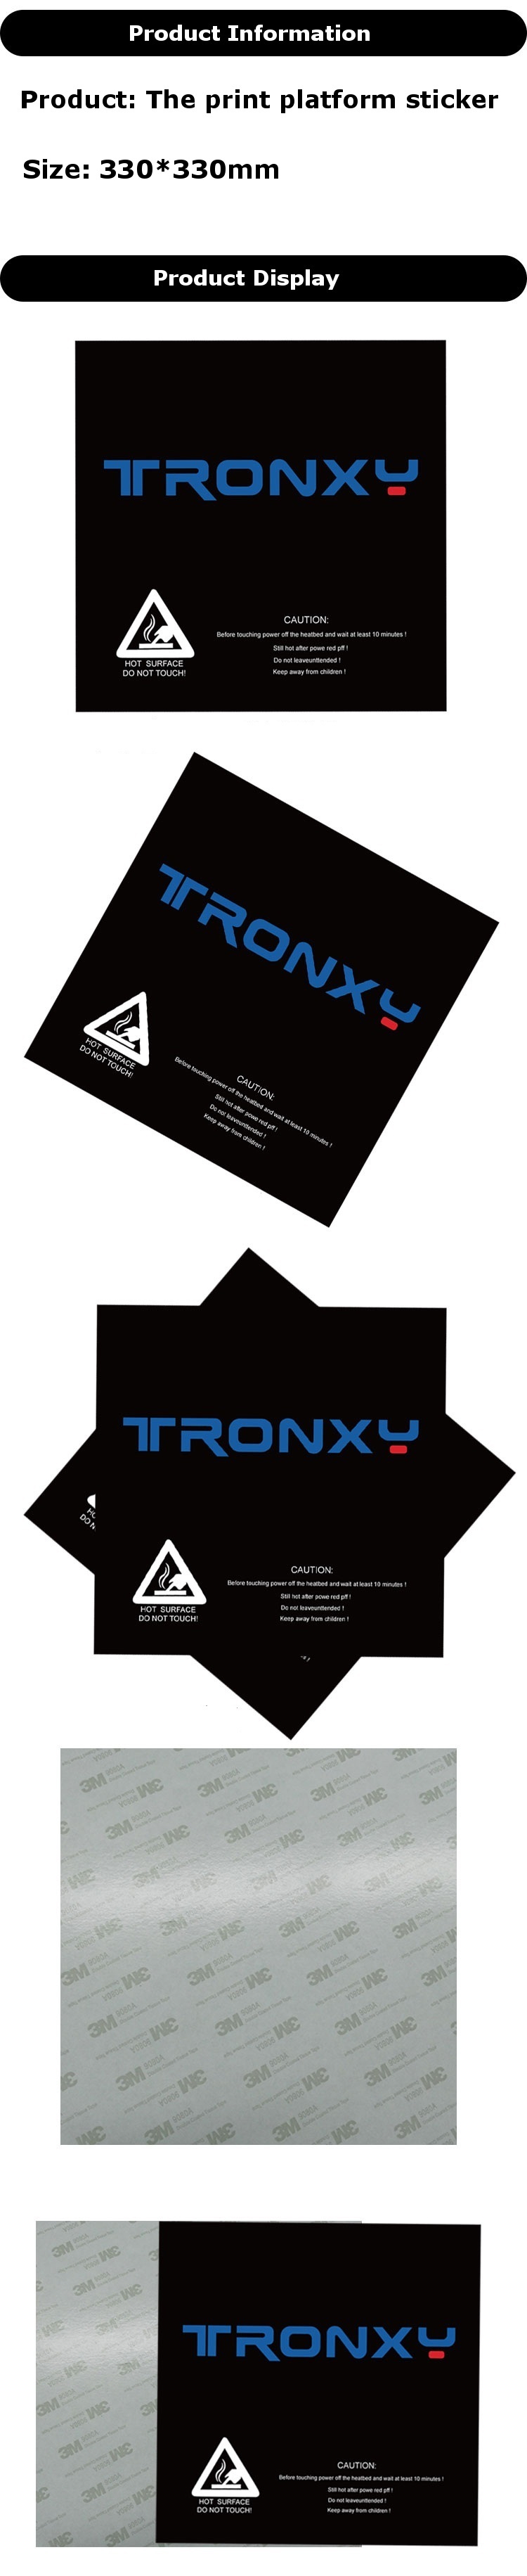 TRONXY® 330*330mm Scrub Surface Hot Bed Sticker For 3D Printer 7